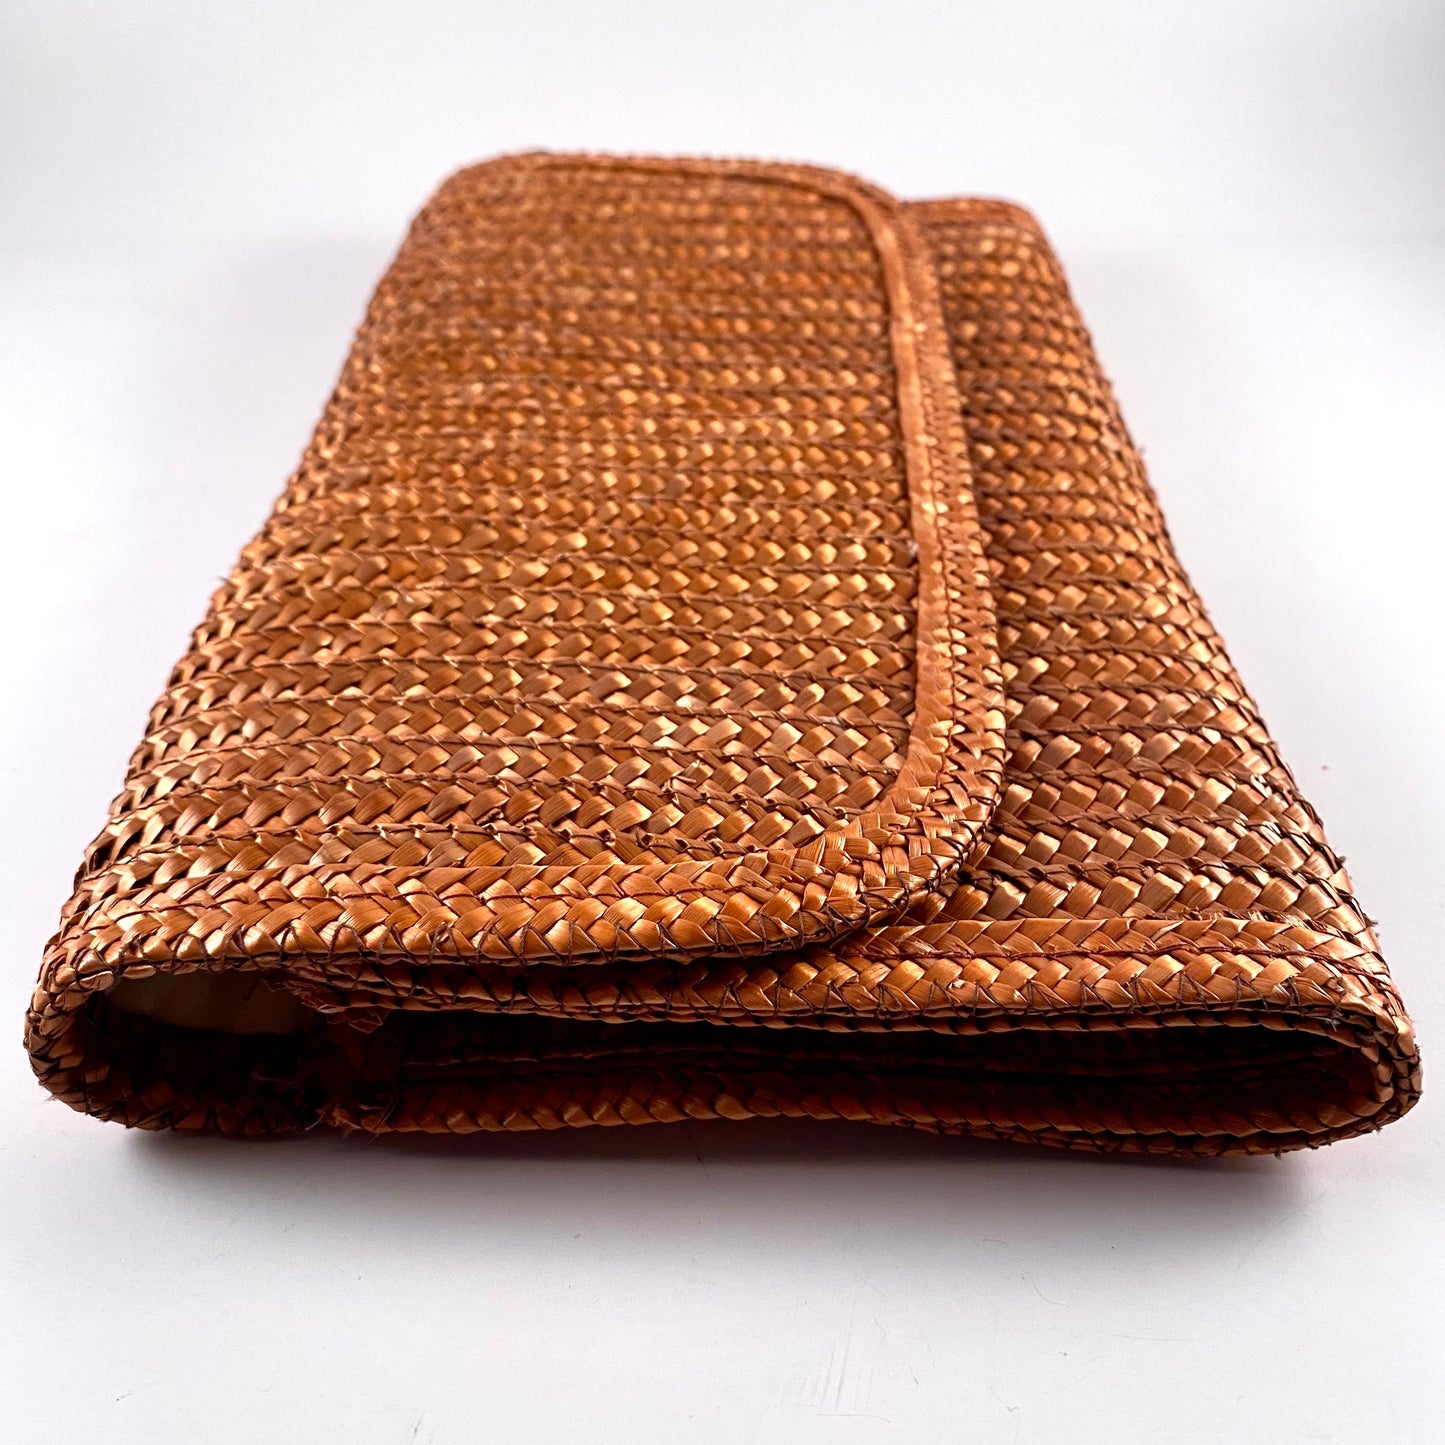 1970s Made In Hong Kong Woven Straw Clutch